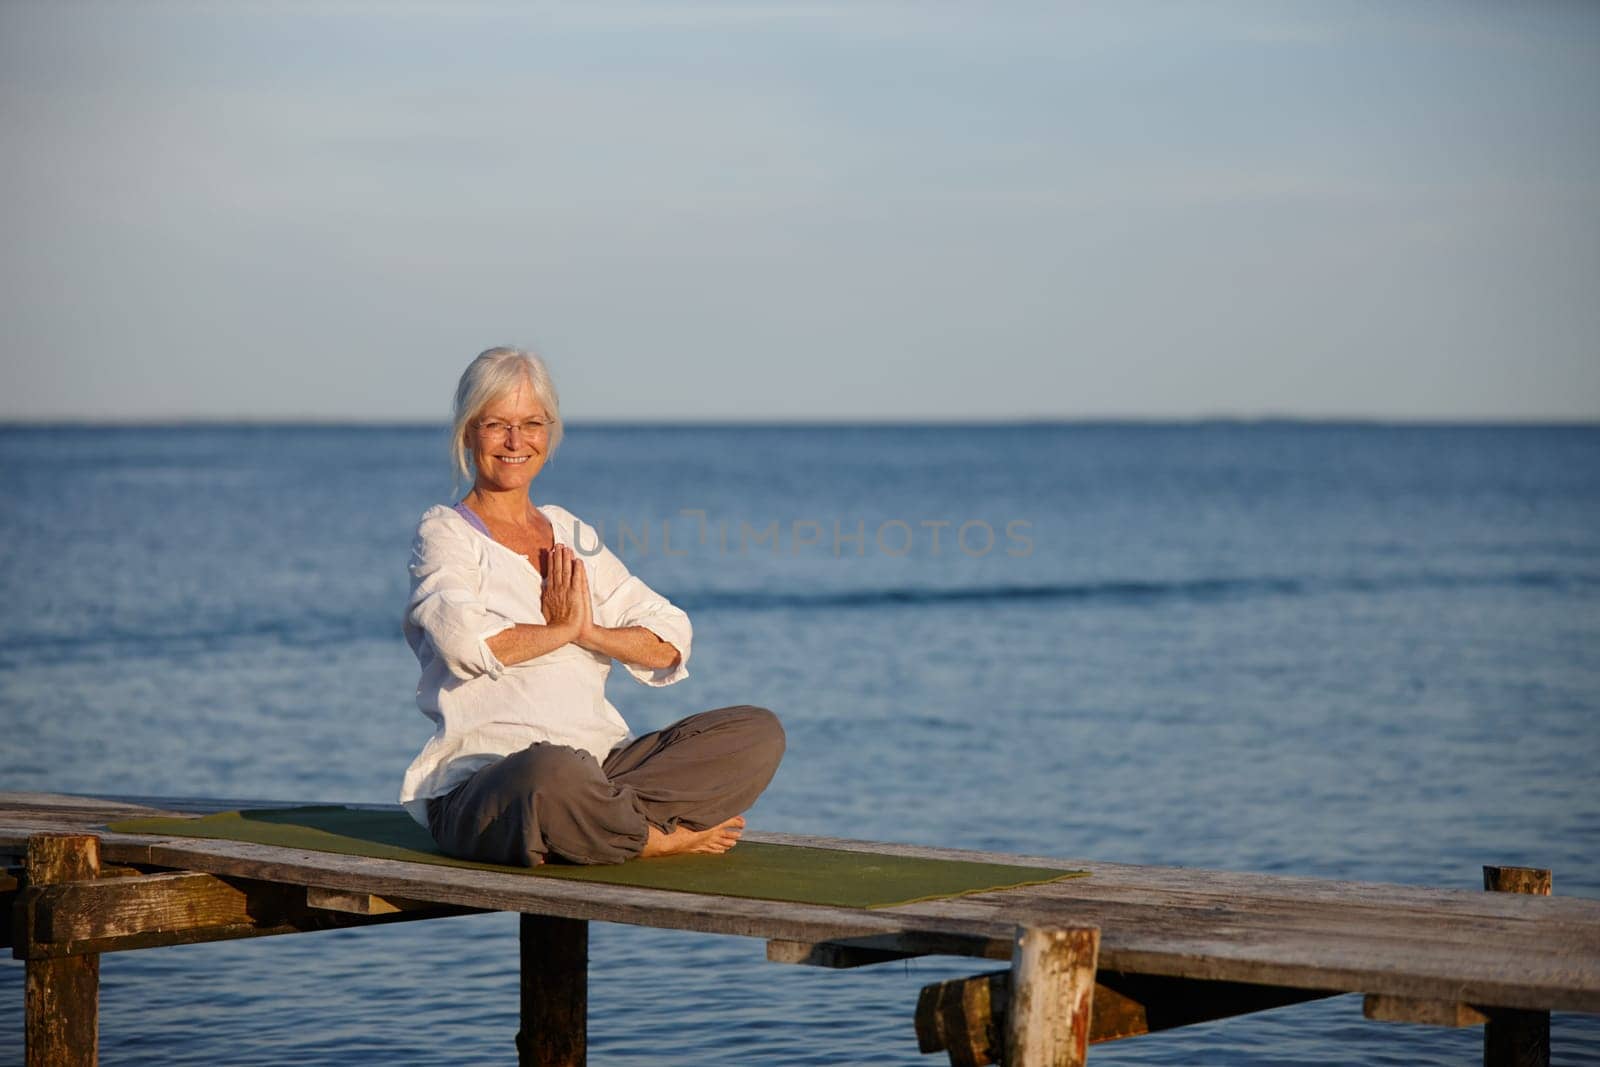 Yoga keeps me young at heart. Portrait of an attractive mature woman doing yoga on a pier out on the ocean